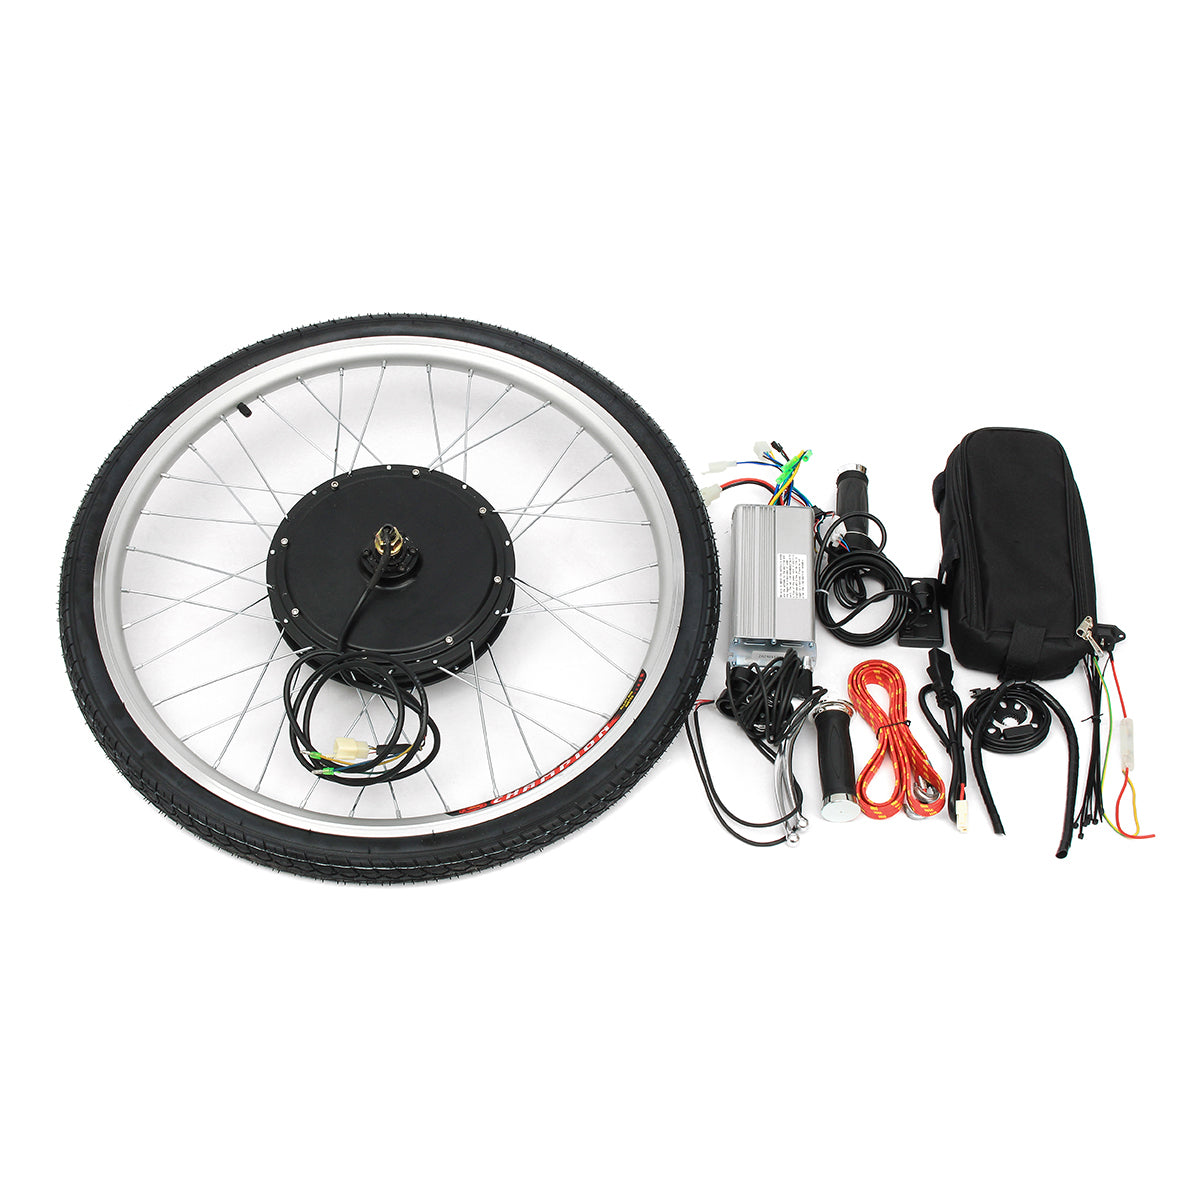 LCD + 48V 1000W 26inch Hight Speed Scooter Electric Bicycle E-bike Hub Motor Conversion Kit - Auto GoShop